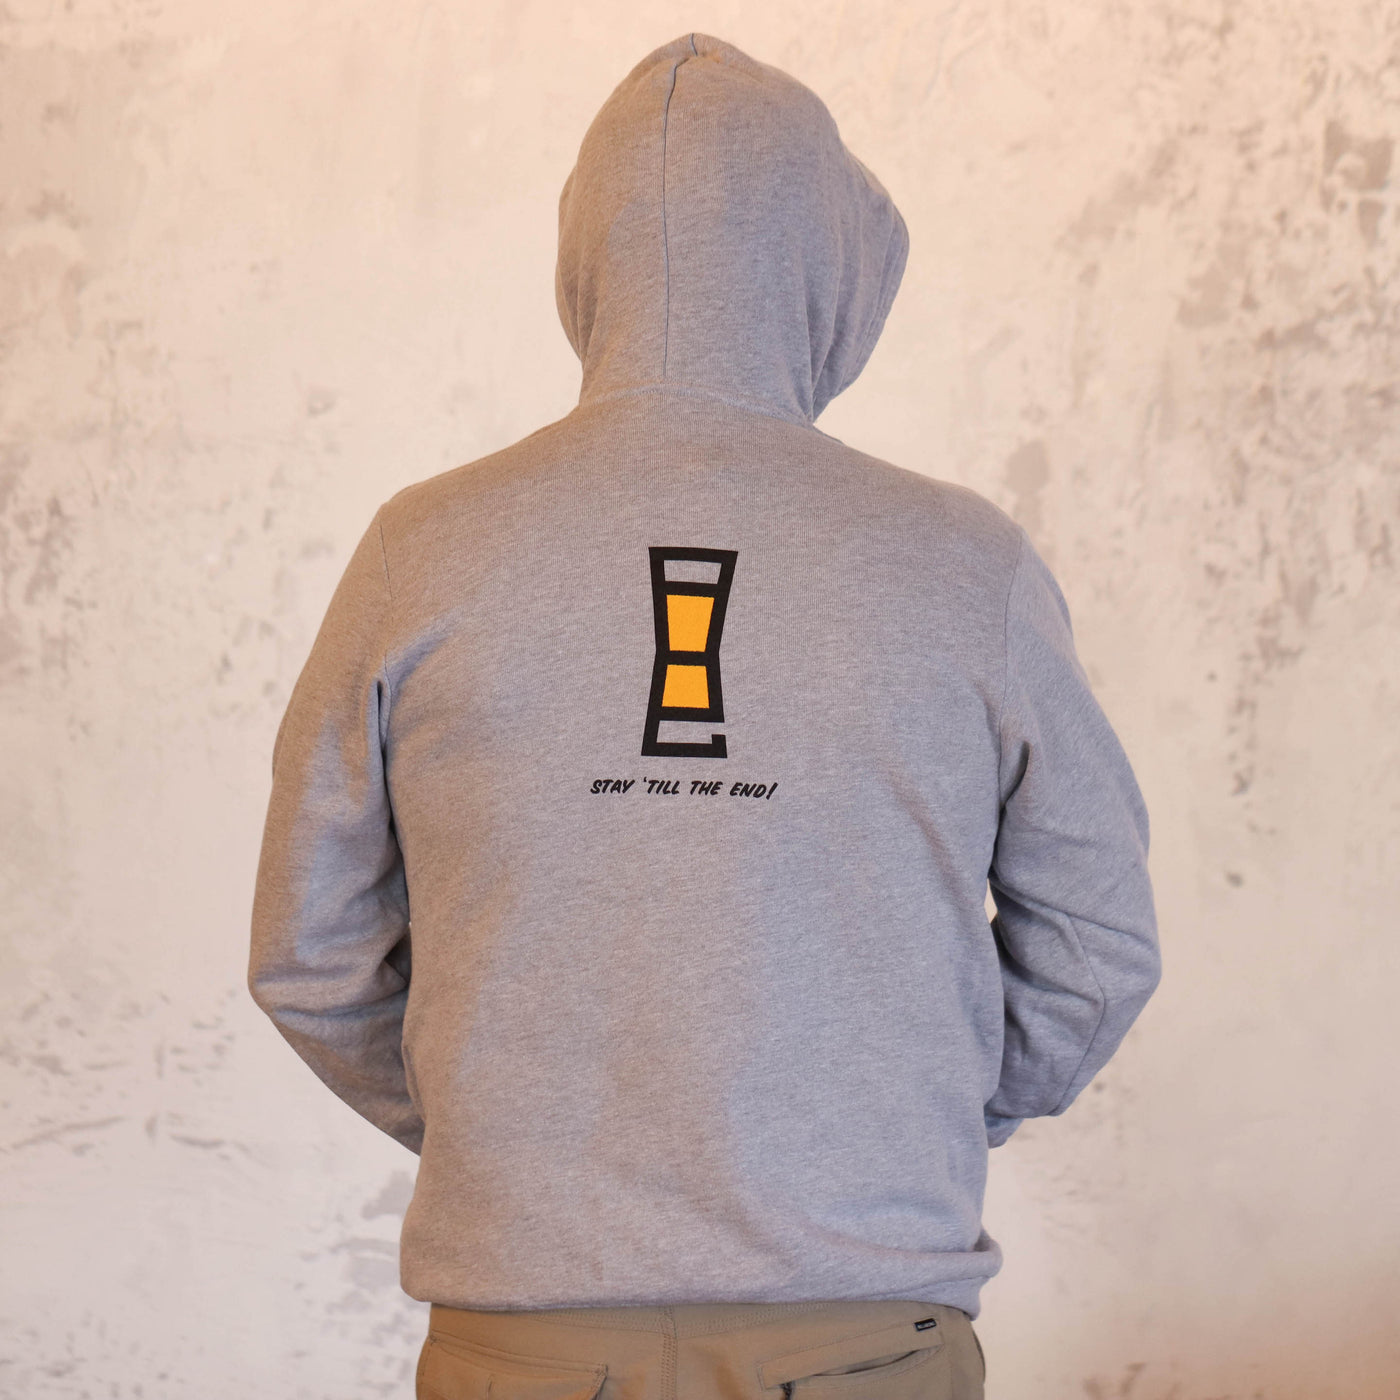 Gray Pullover Hoodie